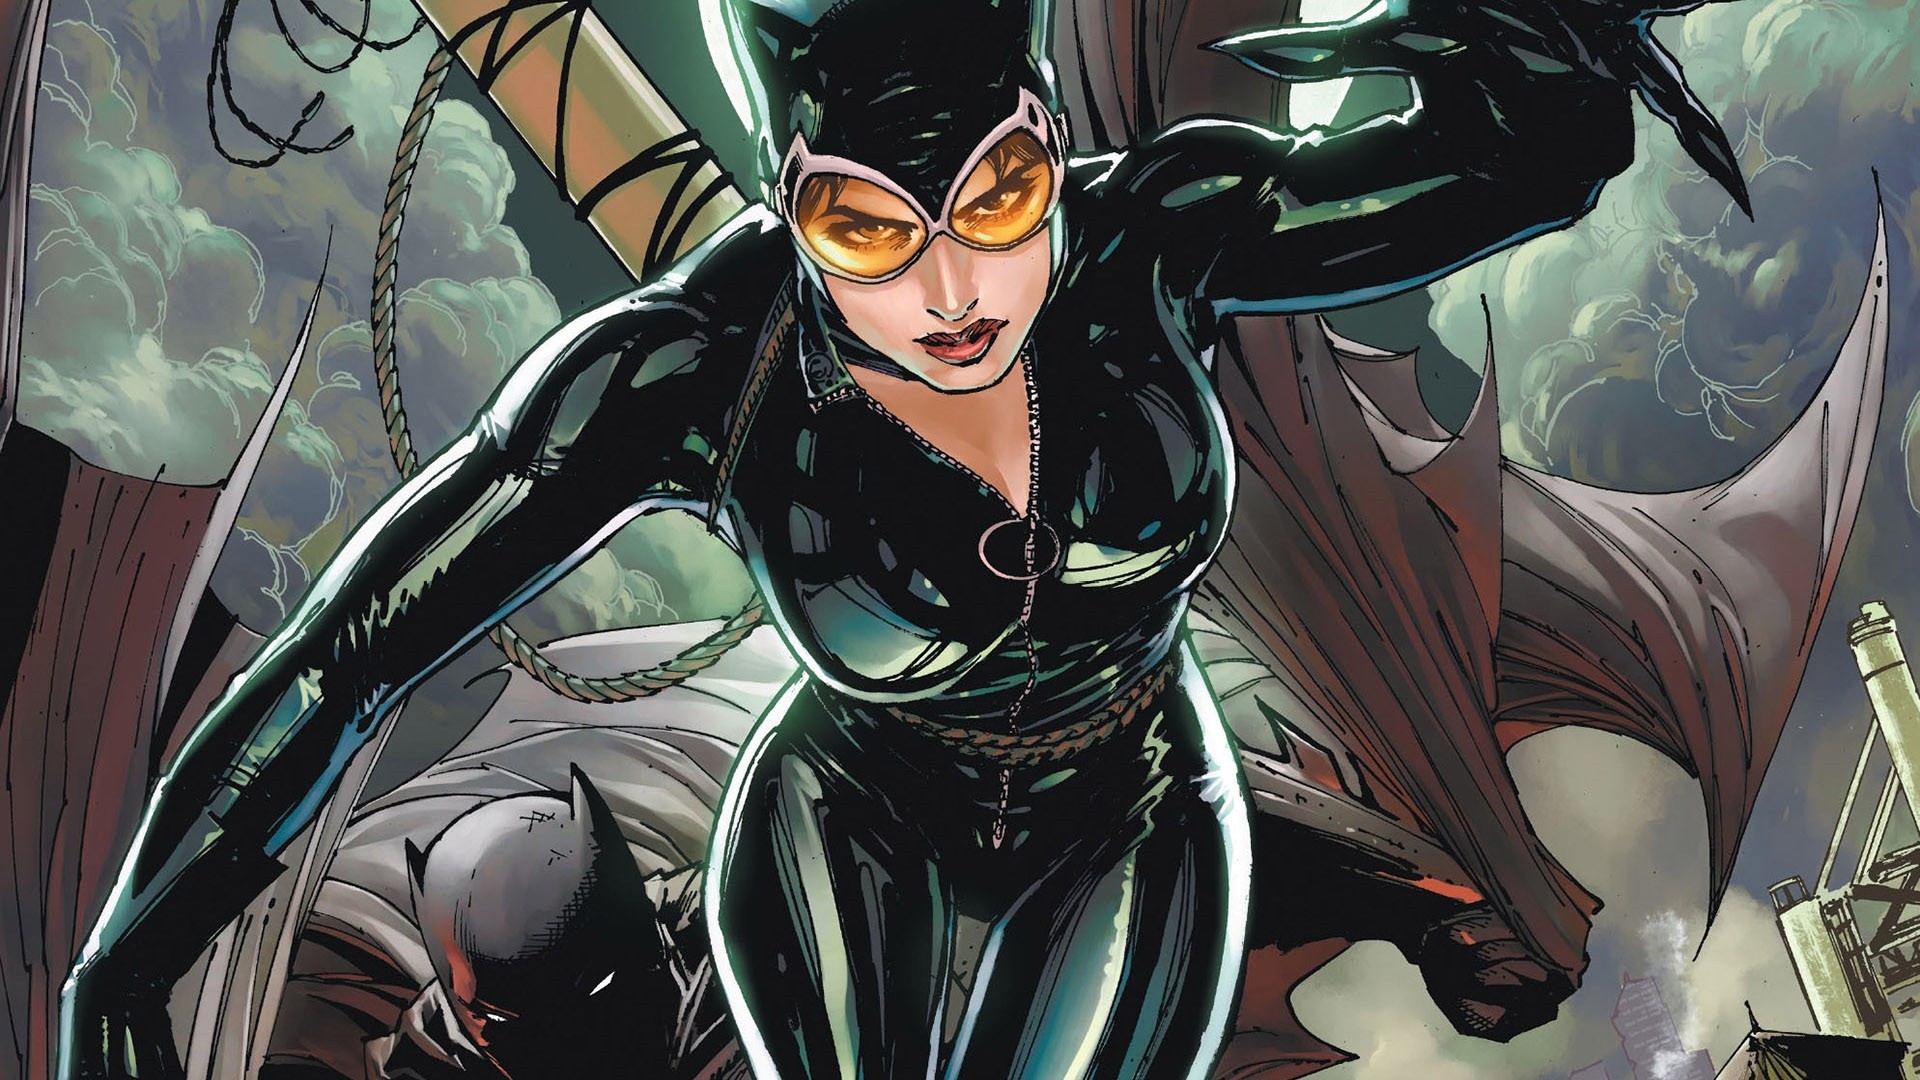 Catwoman: Her role has often fluctuated between villainess and anti-hero. 1920x1080 Full HD Wallpaper.